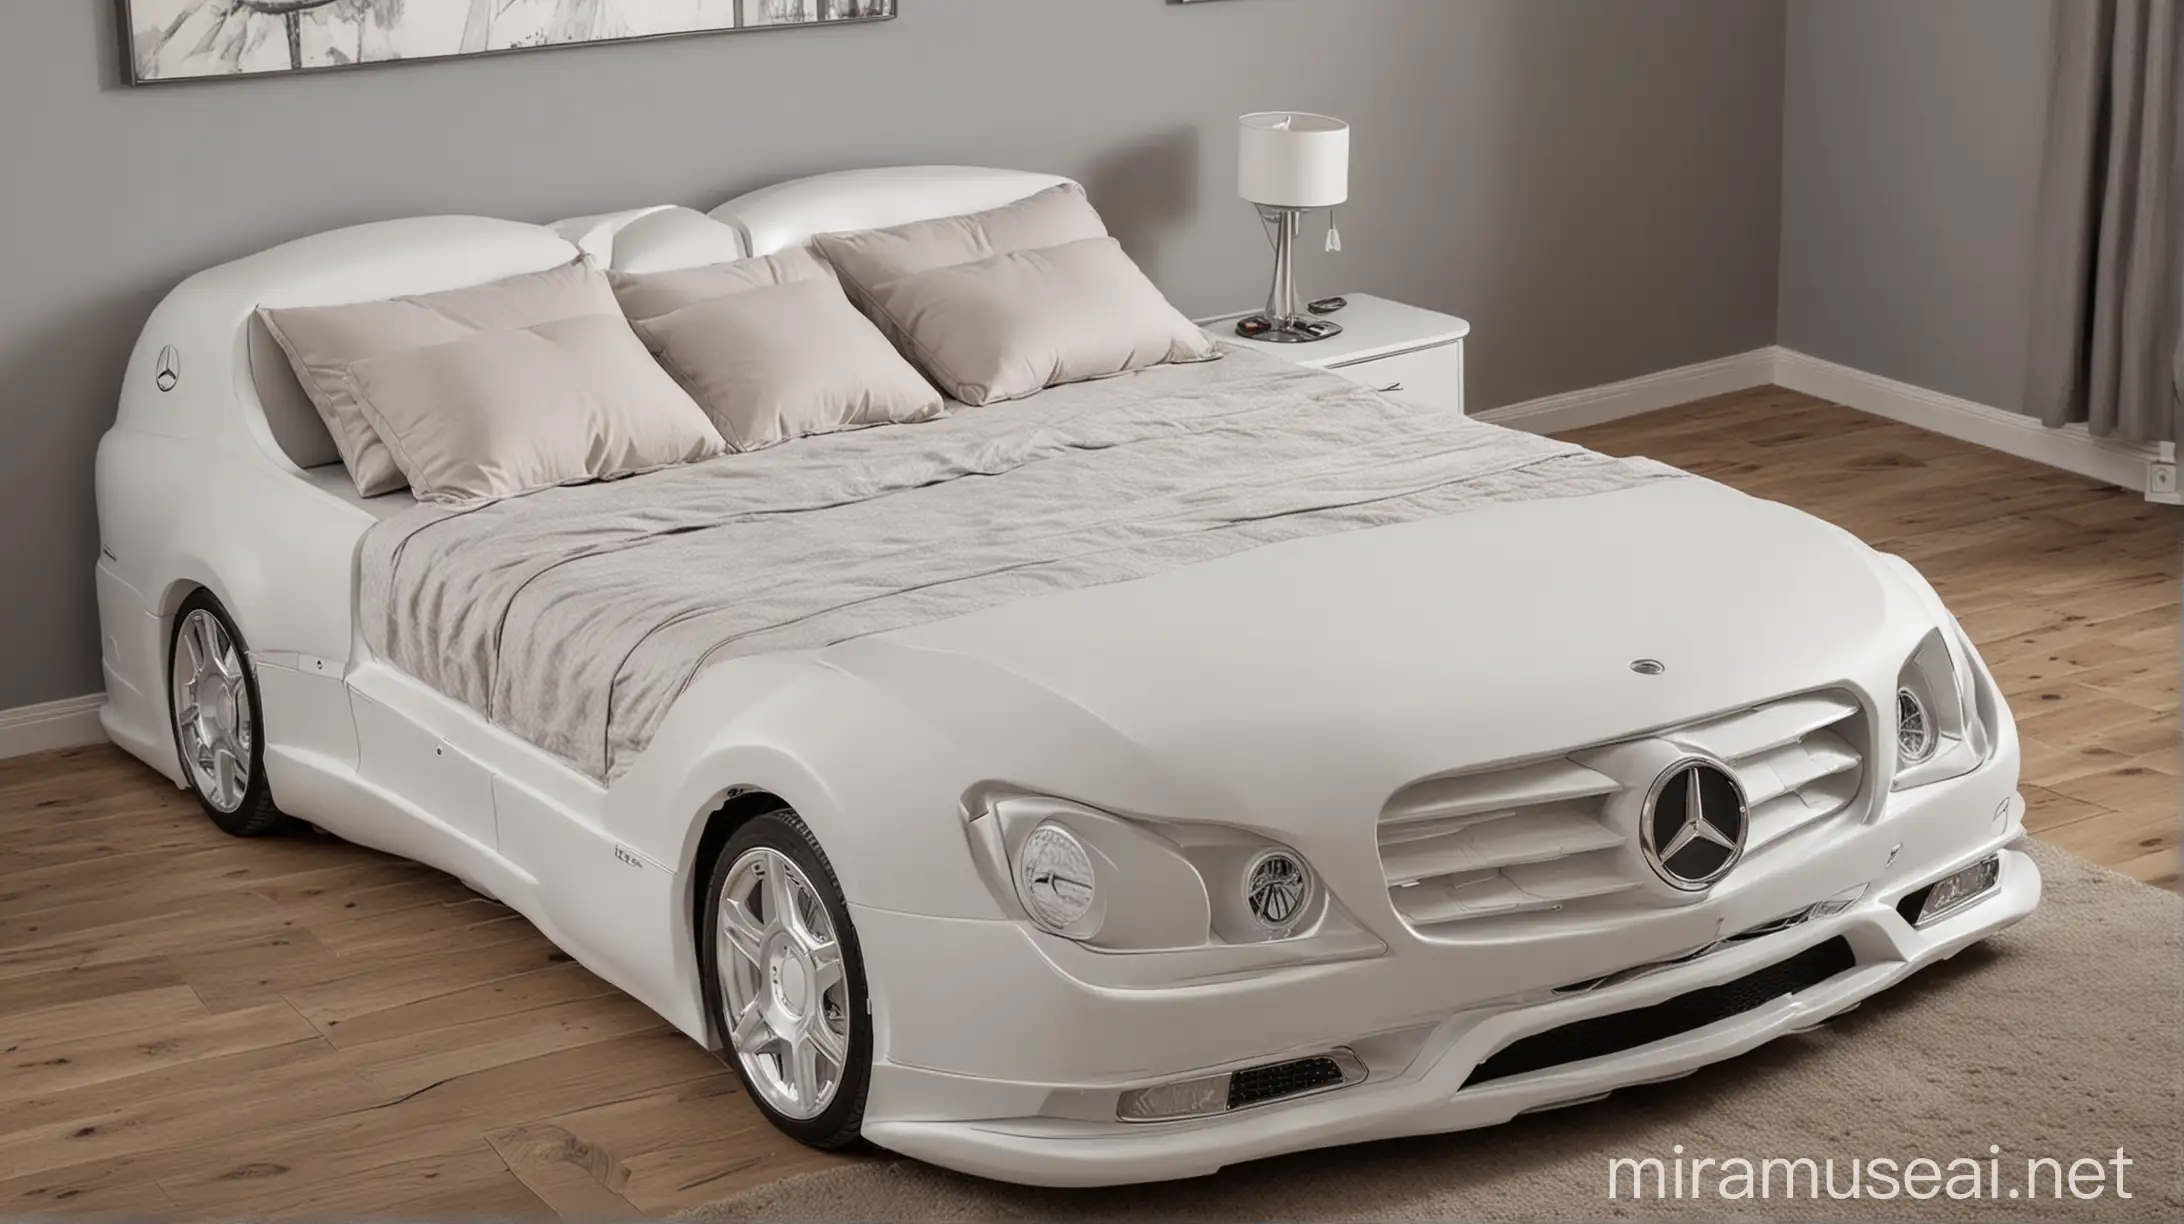 Double bed in the shape of a Mercedes car.